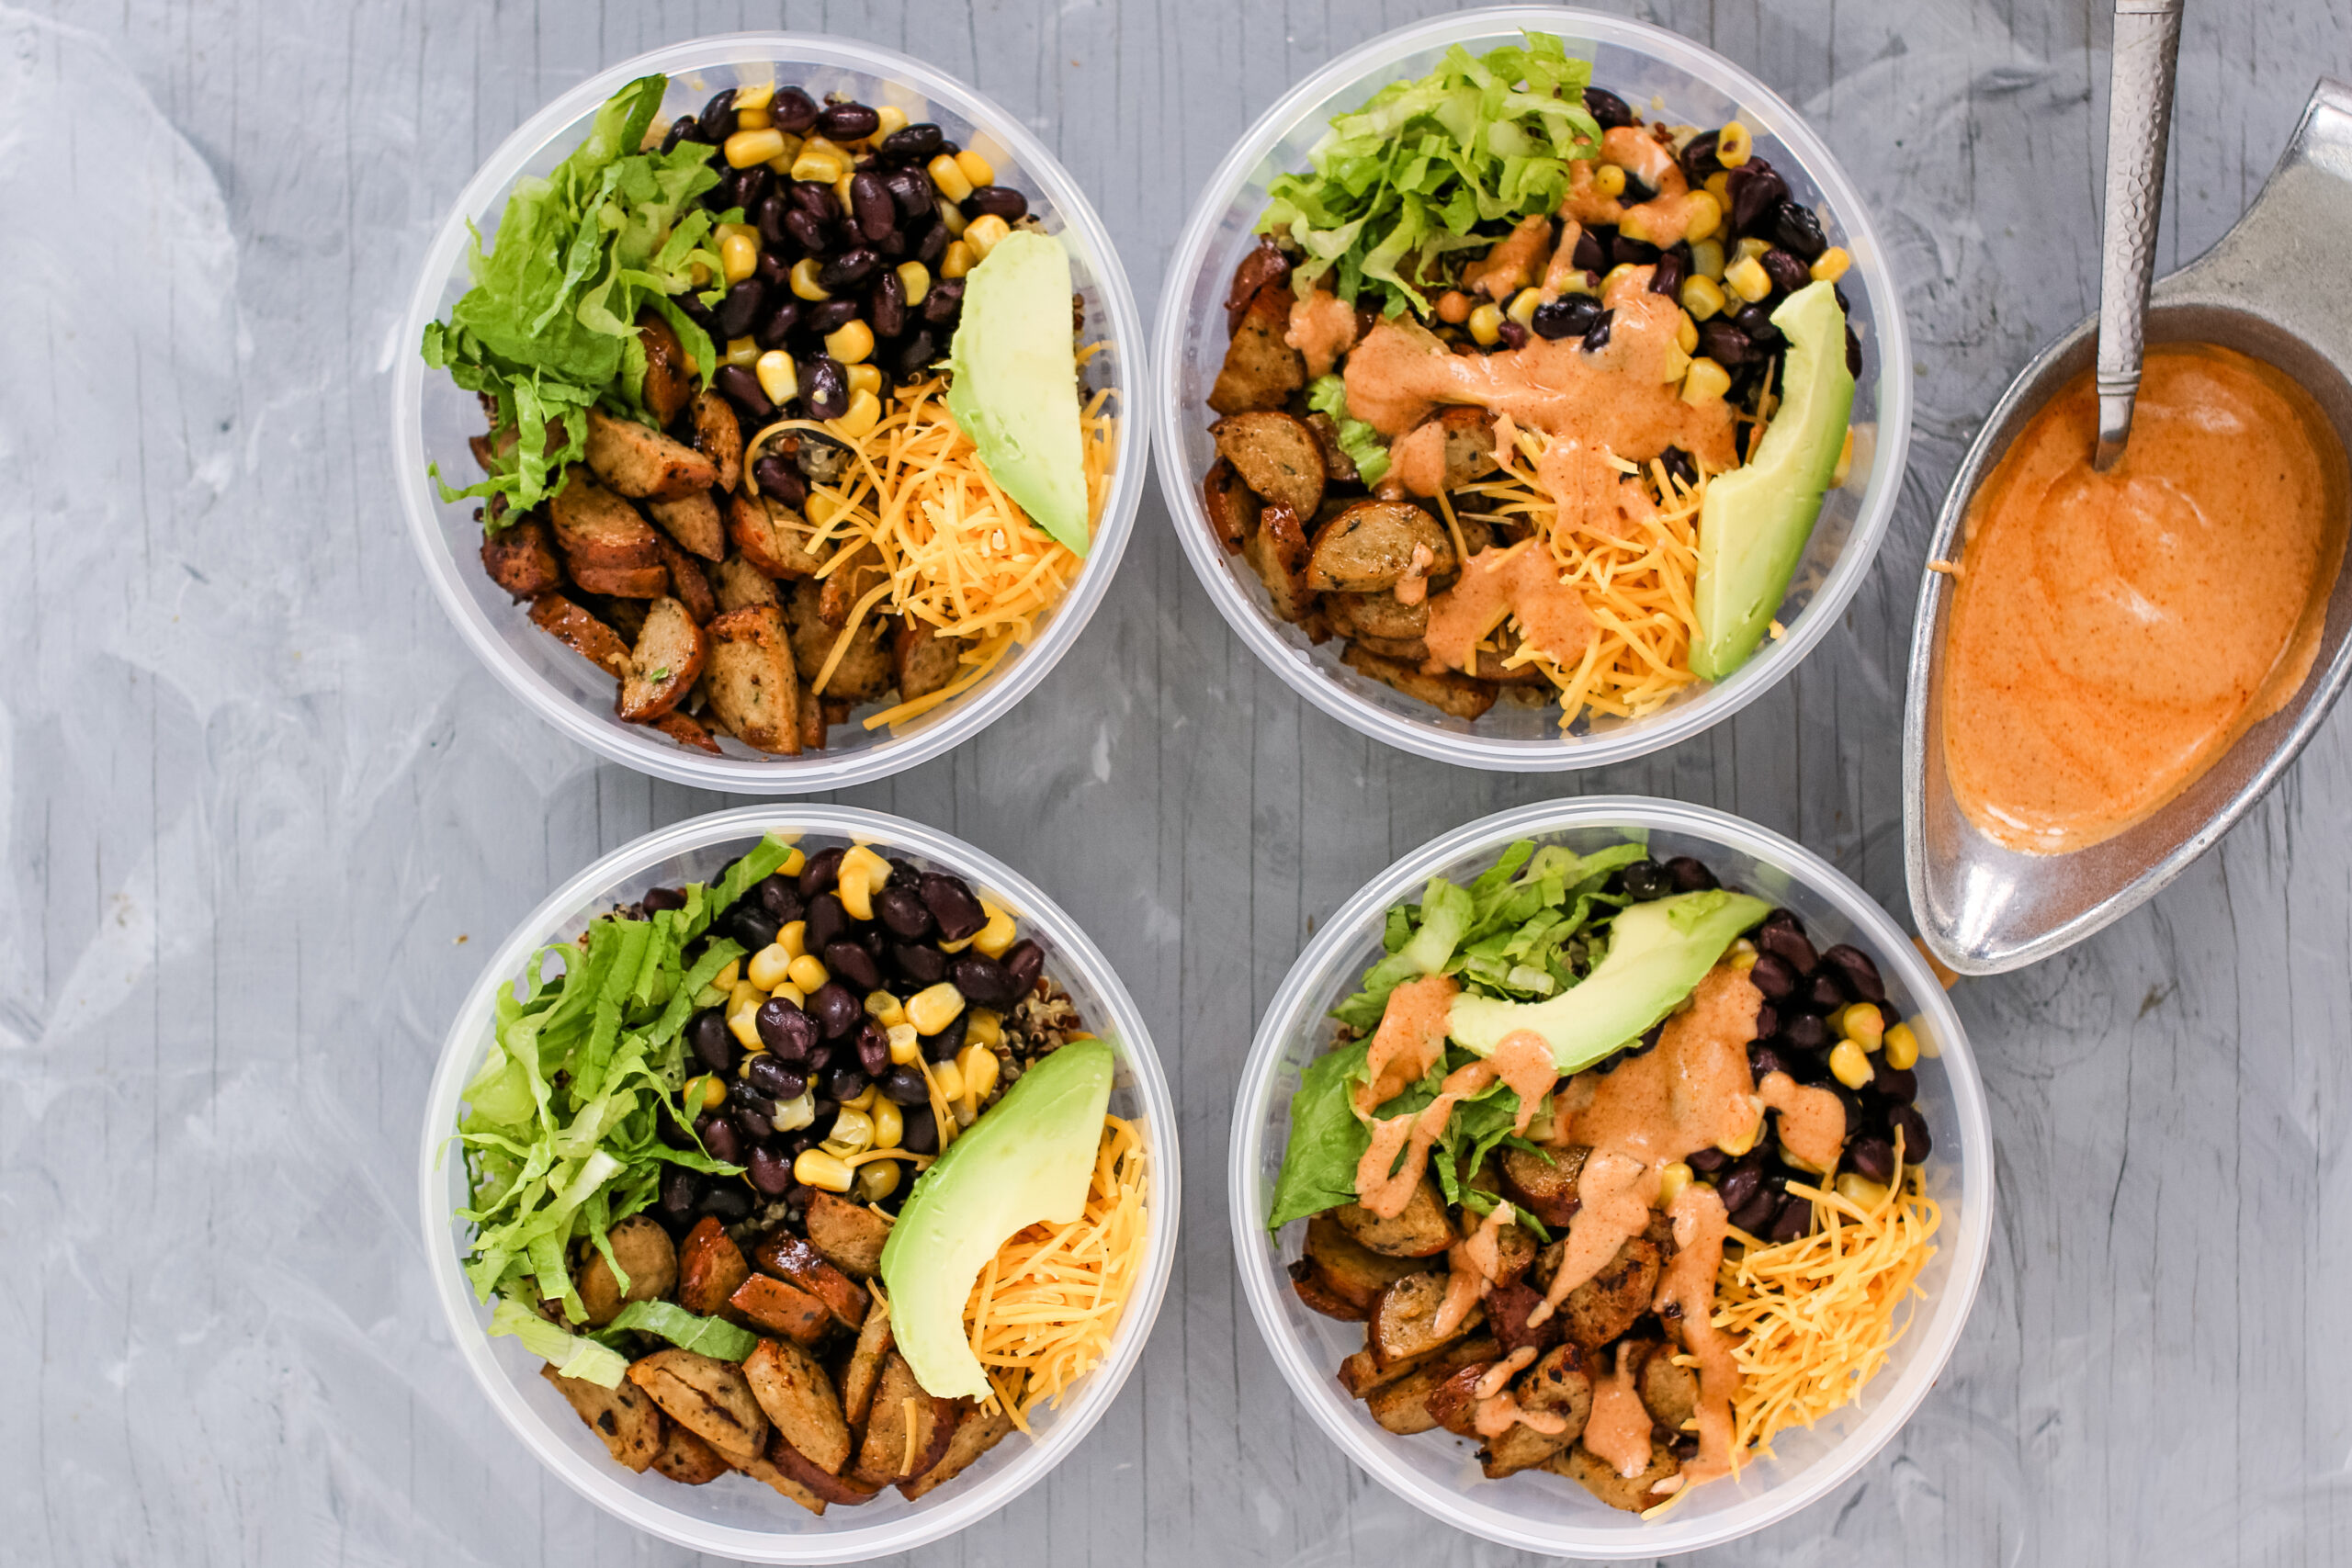 Four plastic bowls of quinoa burrito bowls and toppings with a silver bowl of sauce on the side.